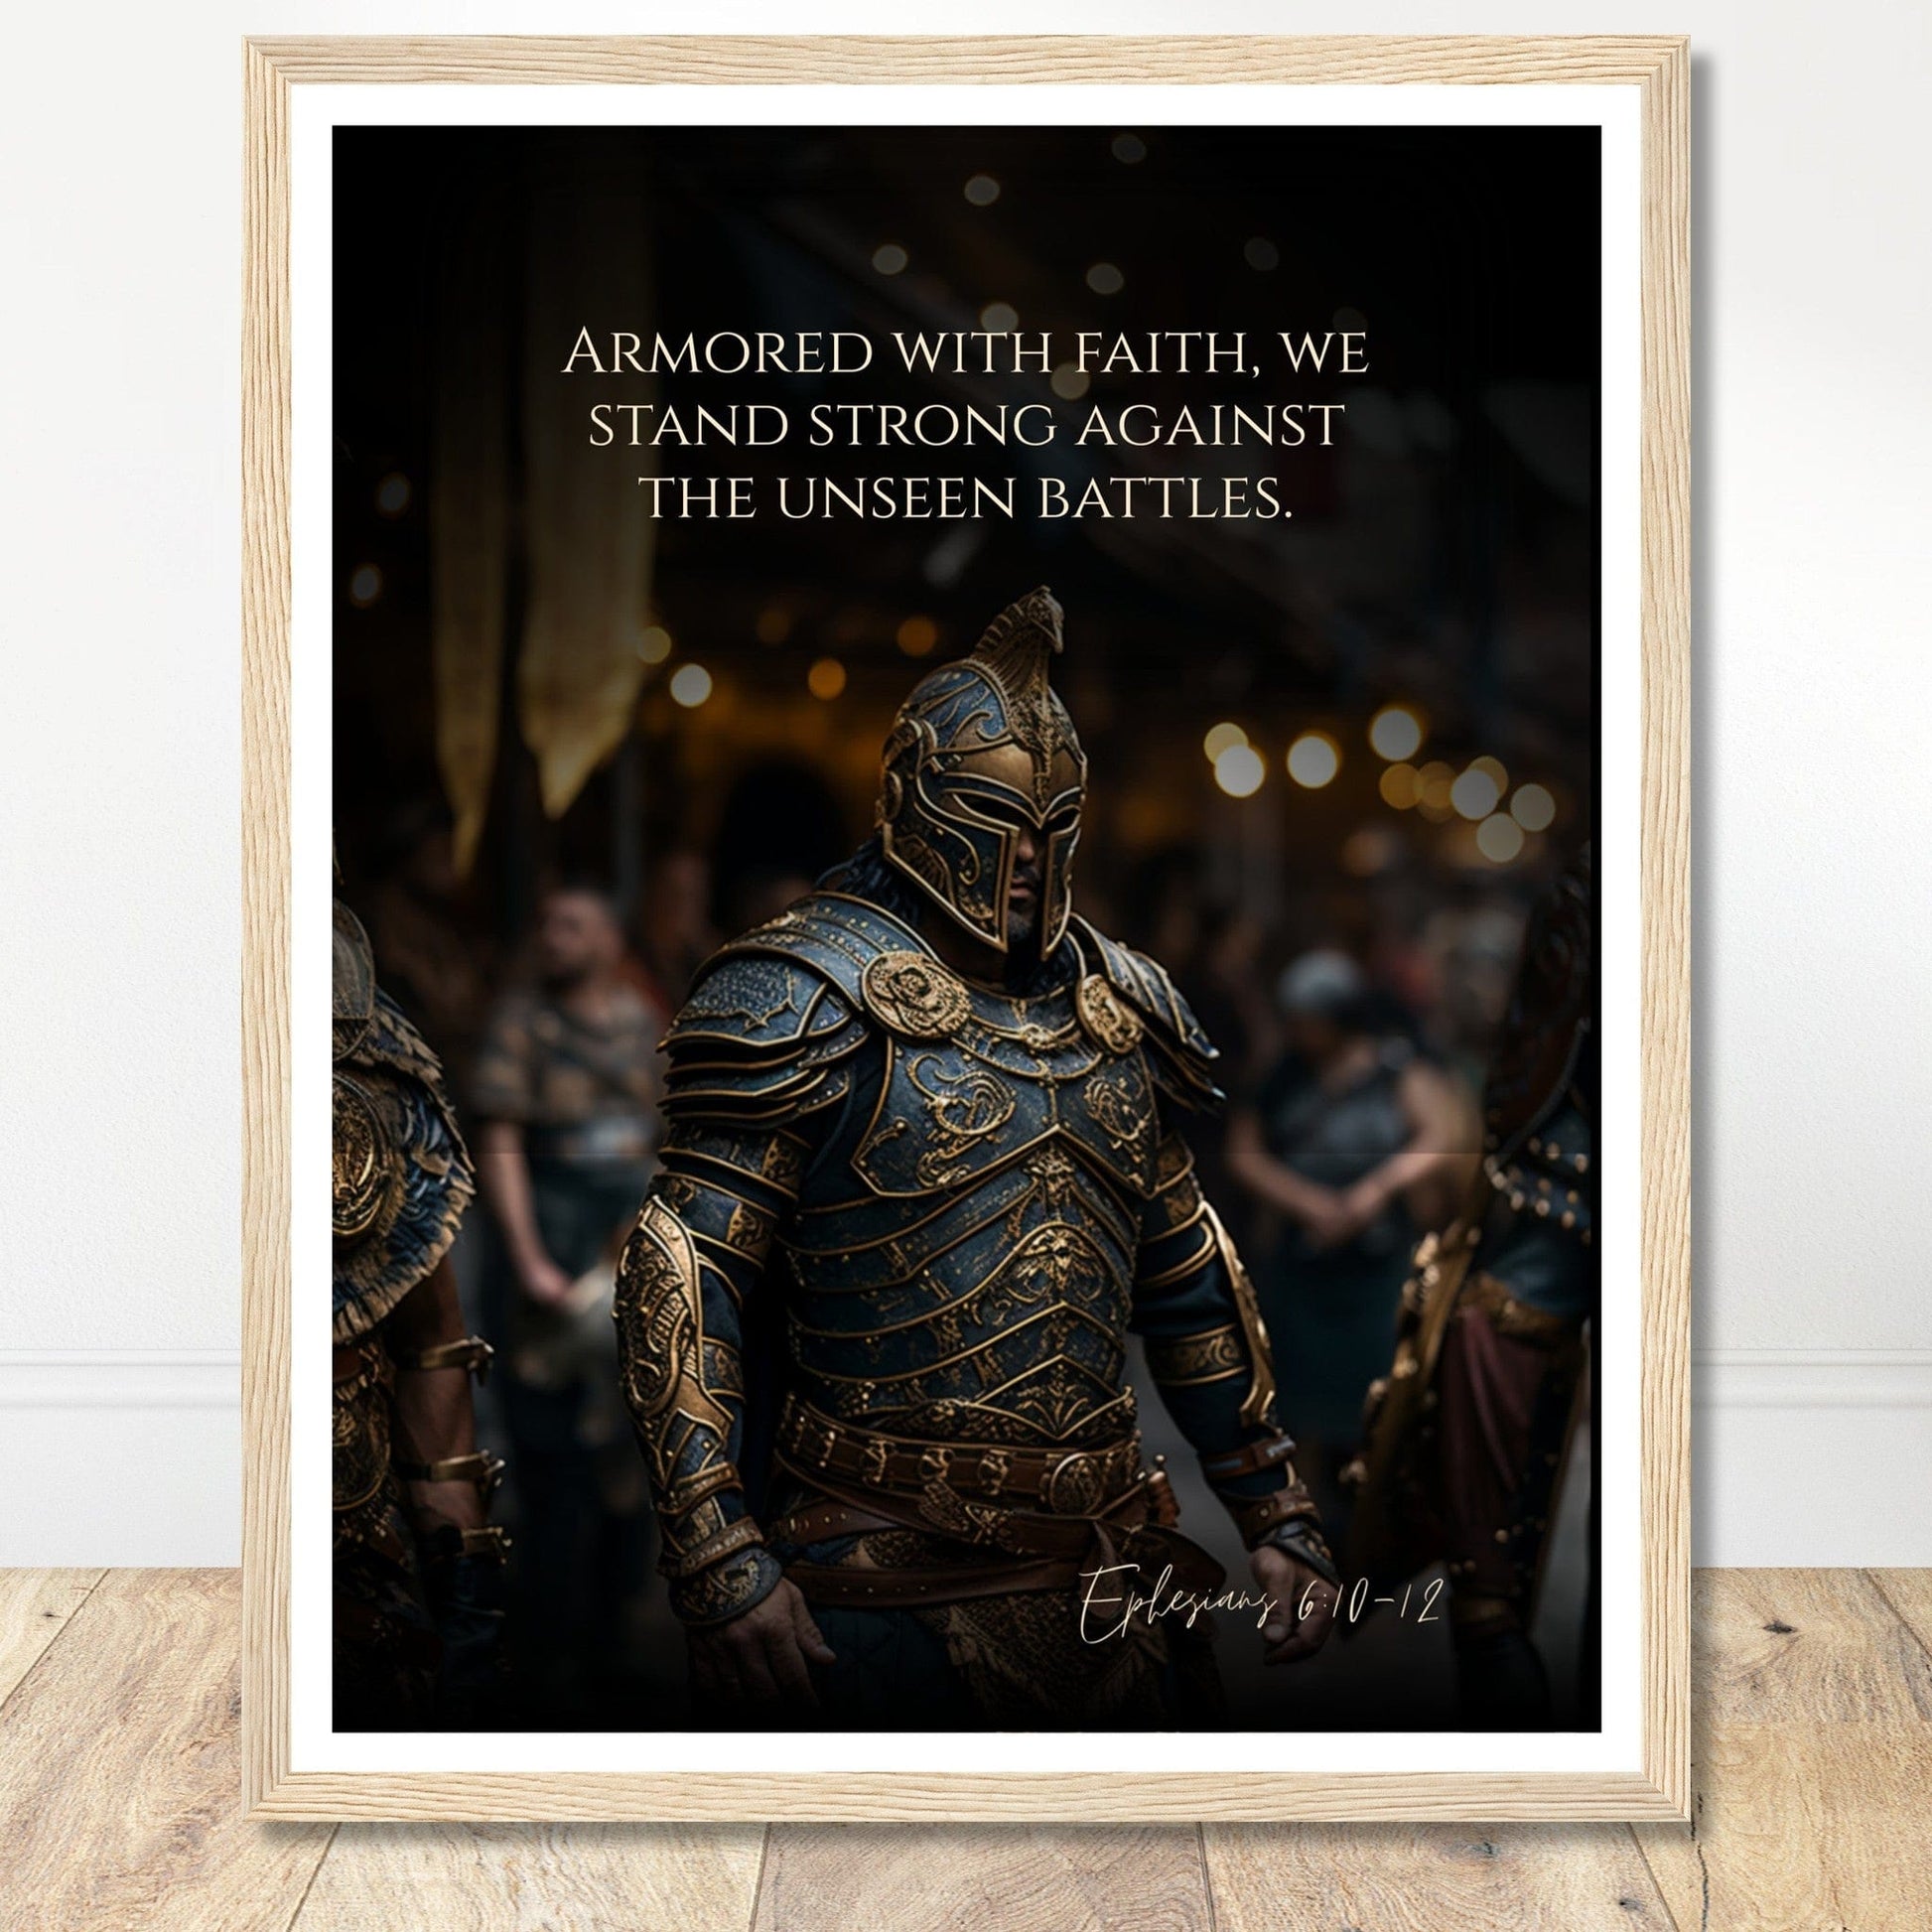 Coffee With My Father Print Material 40x50 cm / 16x20″ / Premium Matte Paper Wooden Framed Poster / Wood frame The Unseen Battles: Ephesians 6:10-12 - Artwork